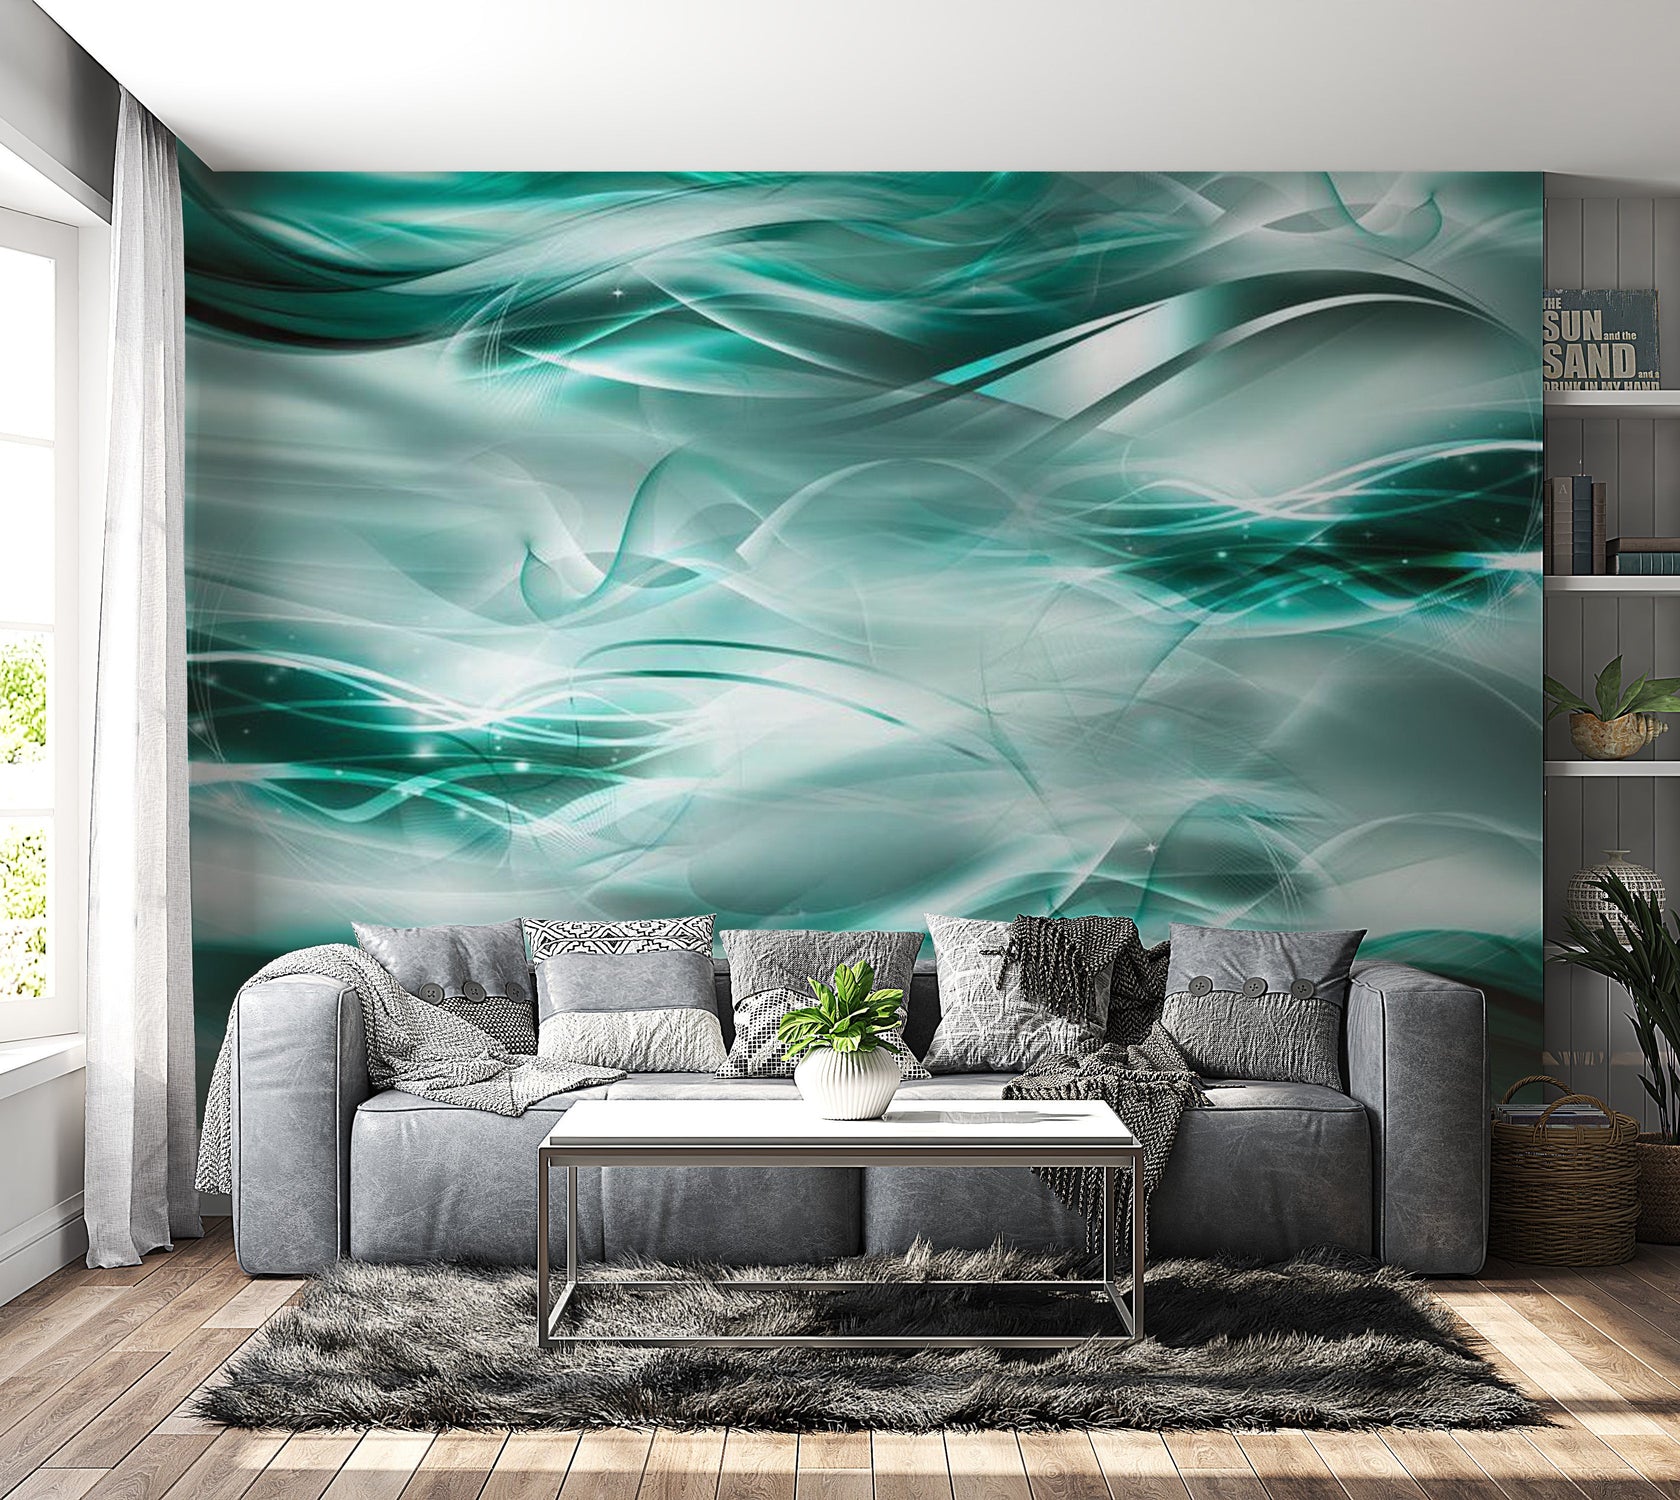 Peel & Stick Glam Wall Mural - Turquoise Ocean - Removable Wall Decals